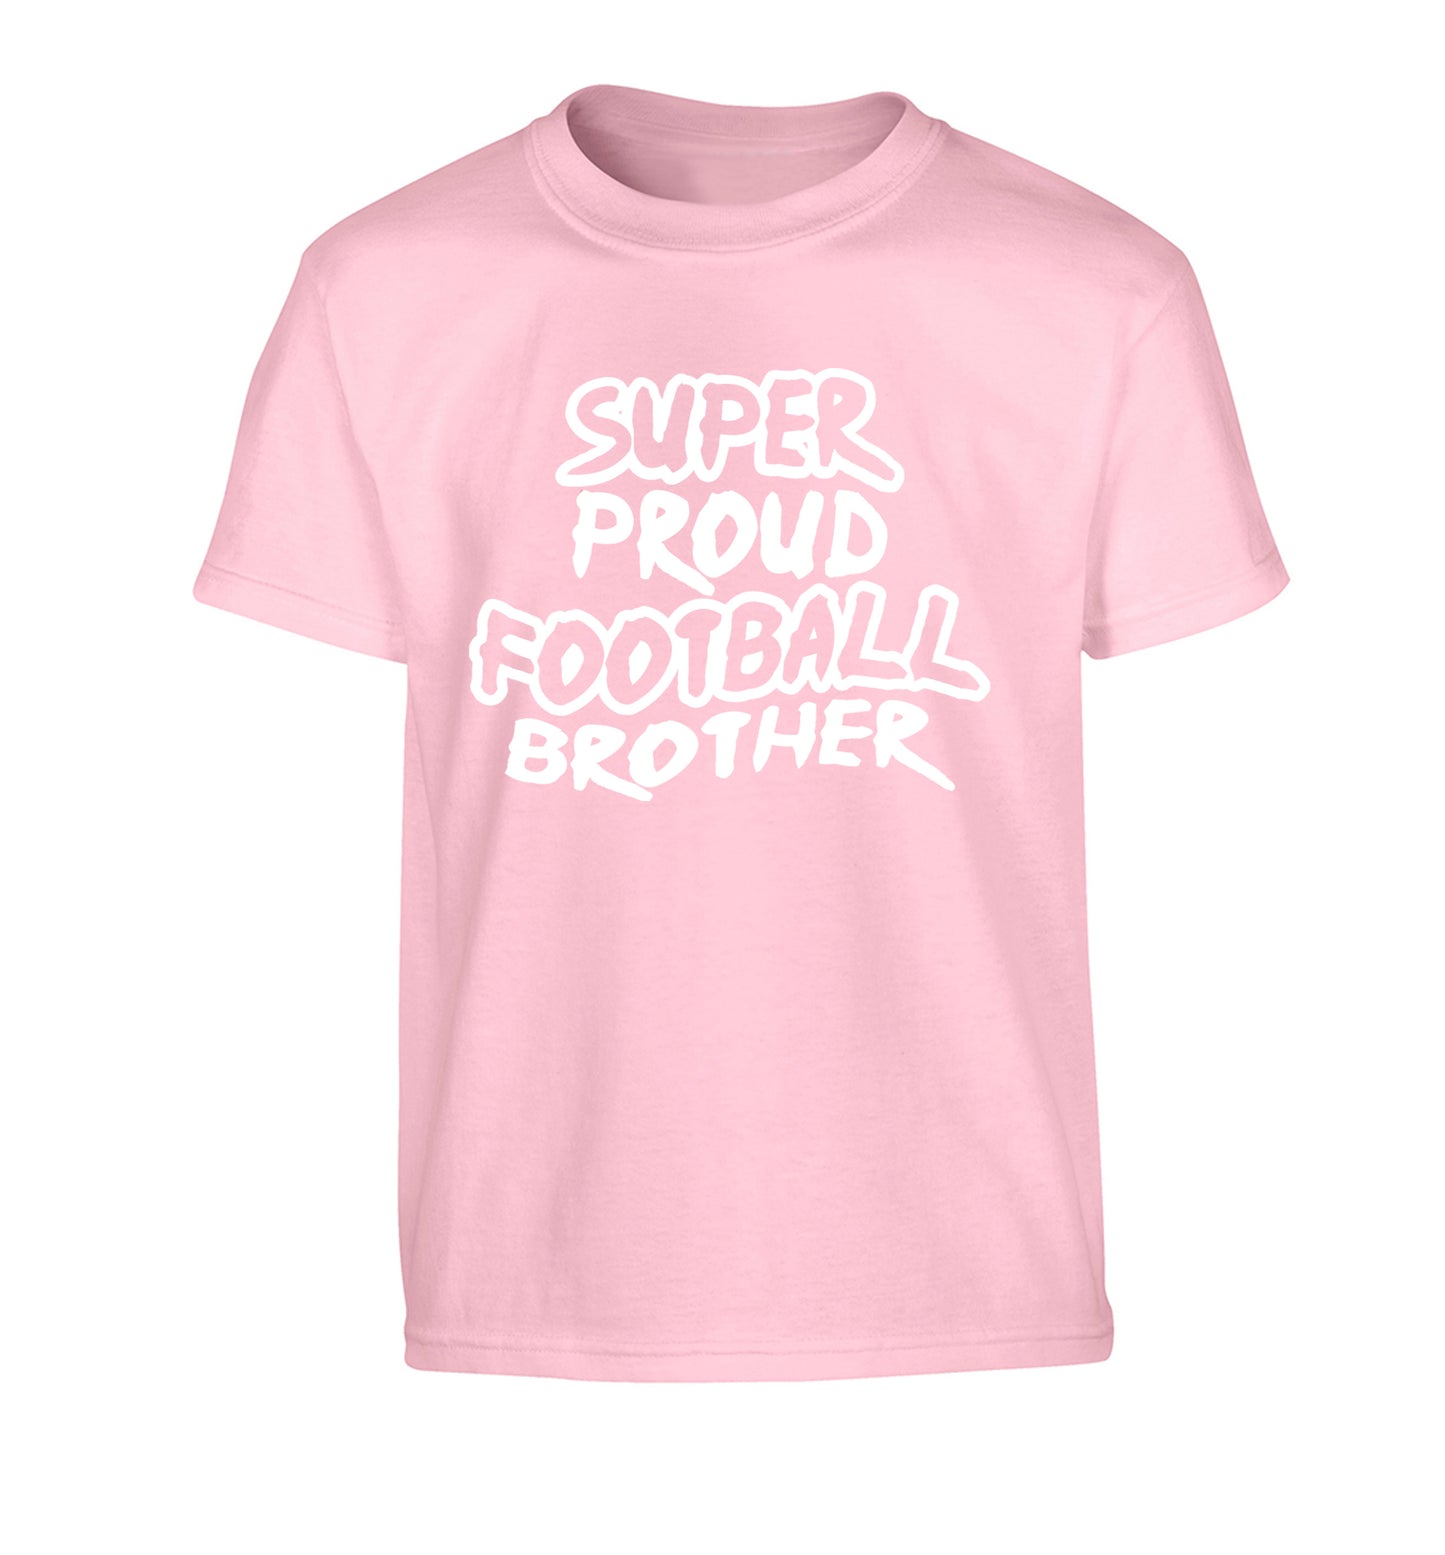 Super proud football brother Children's light pink Tshirt 12-14 Years